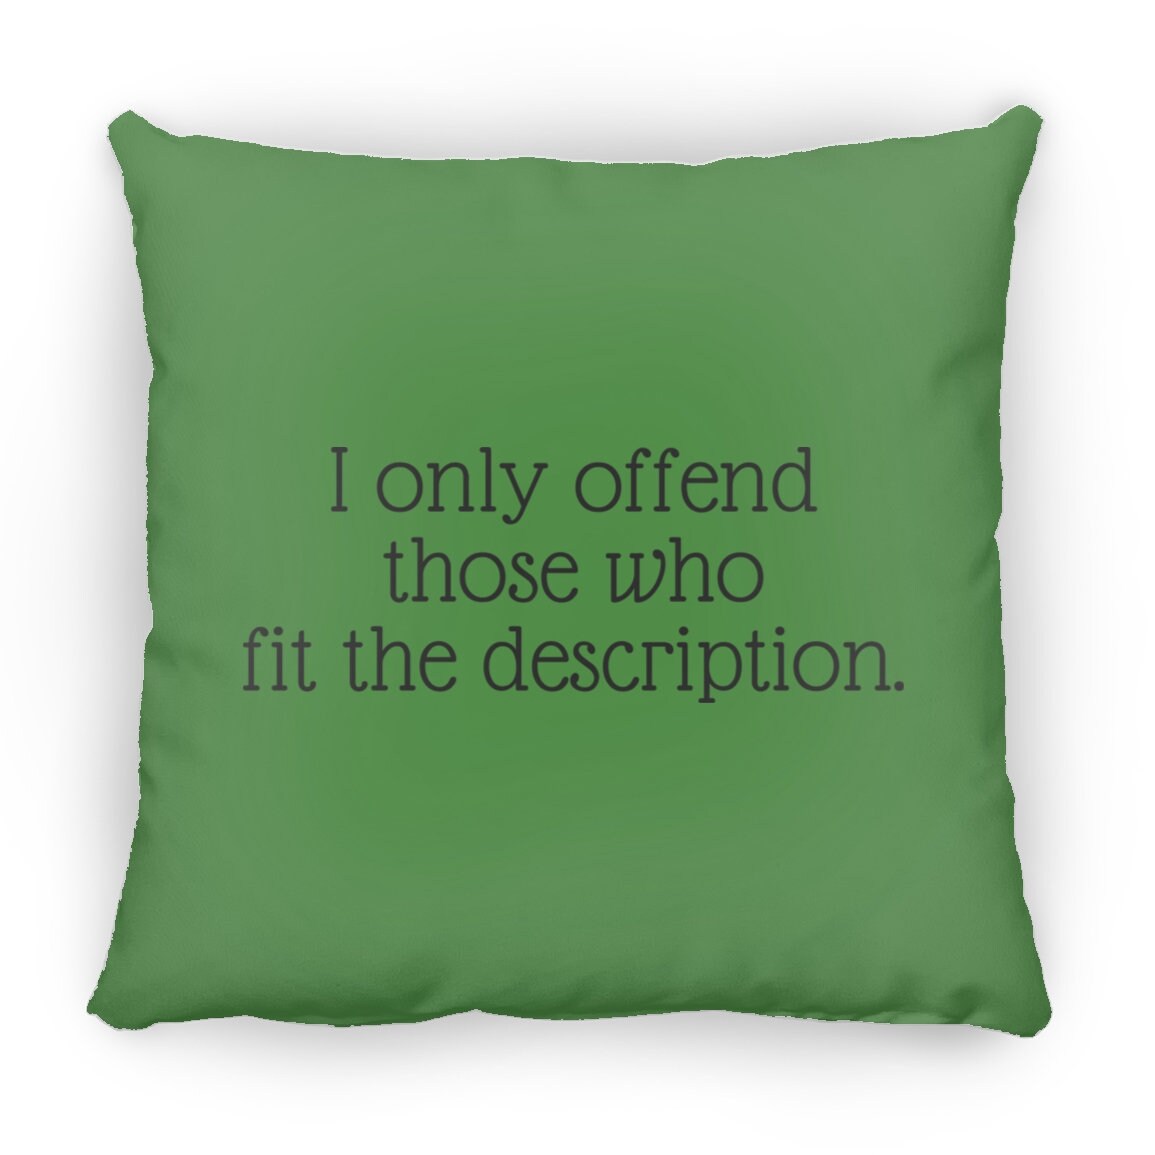 I only offend those who fit the description Throw Pillow